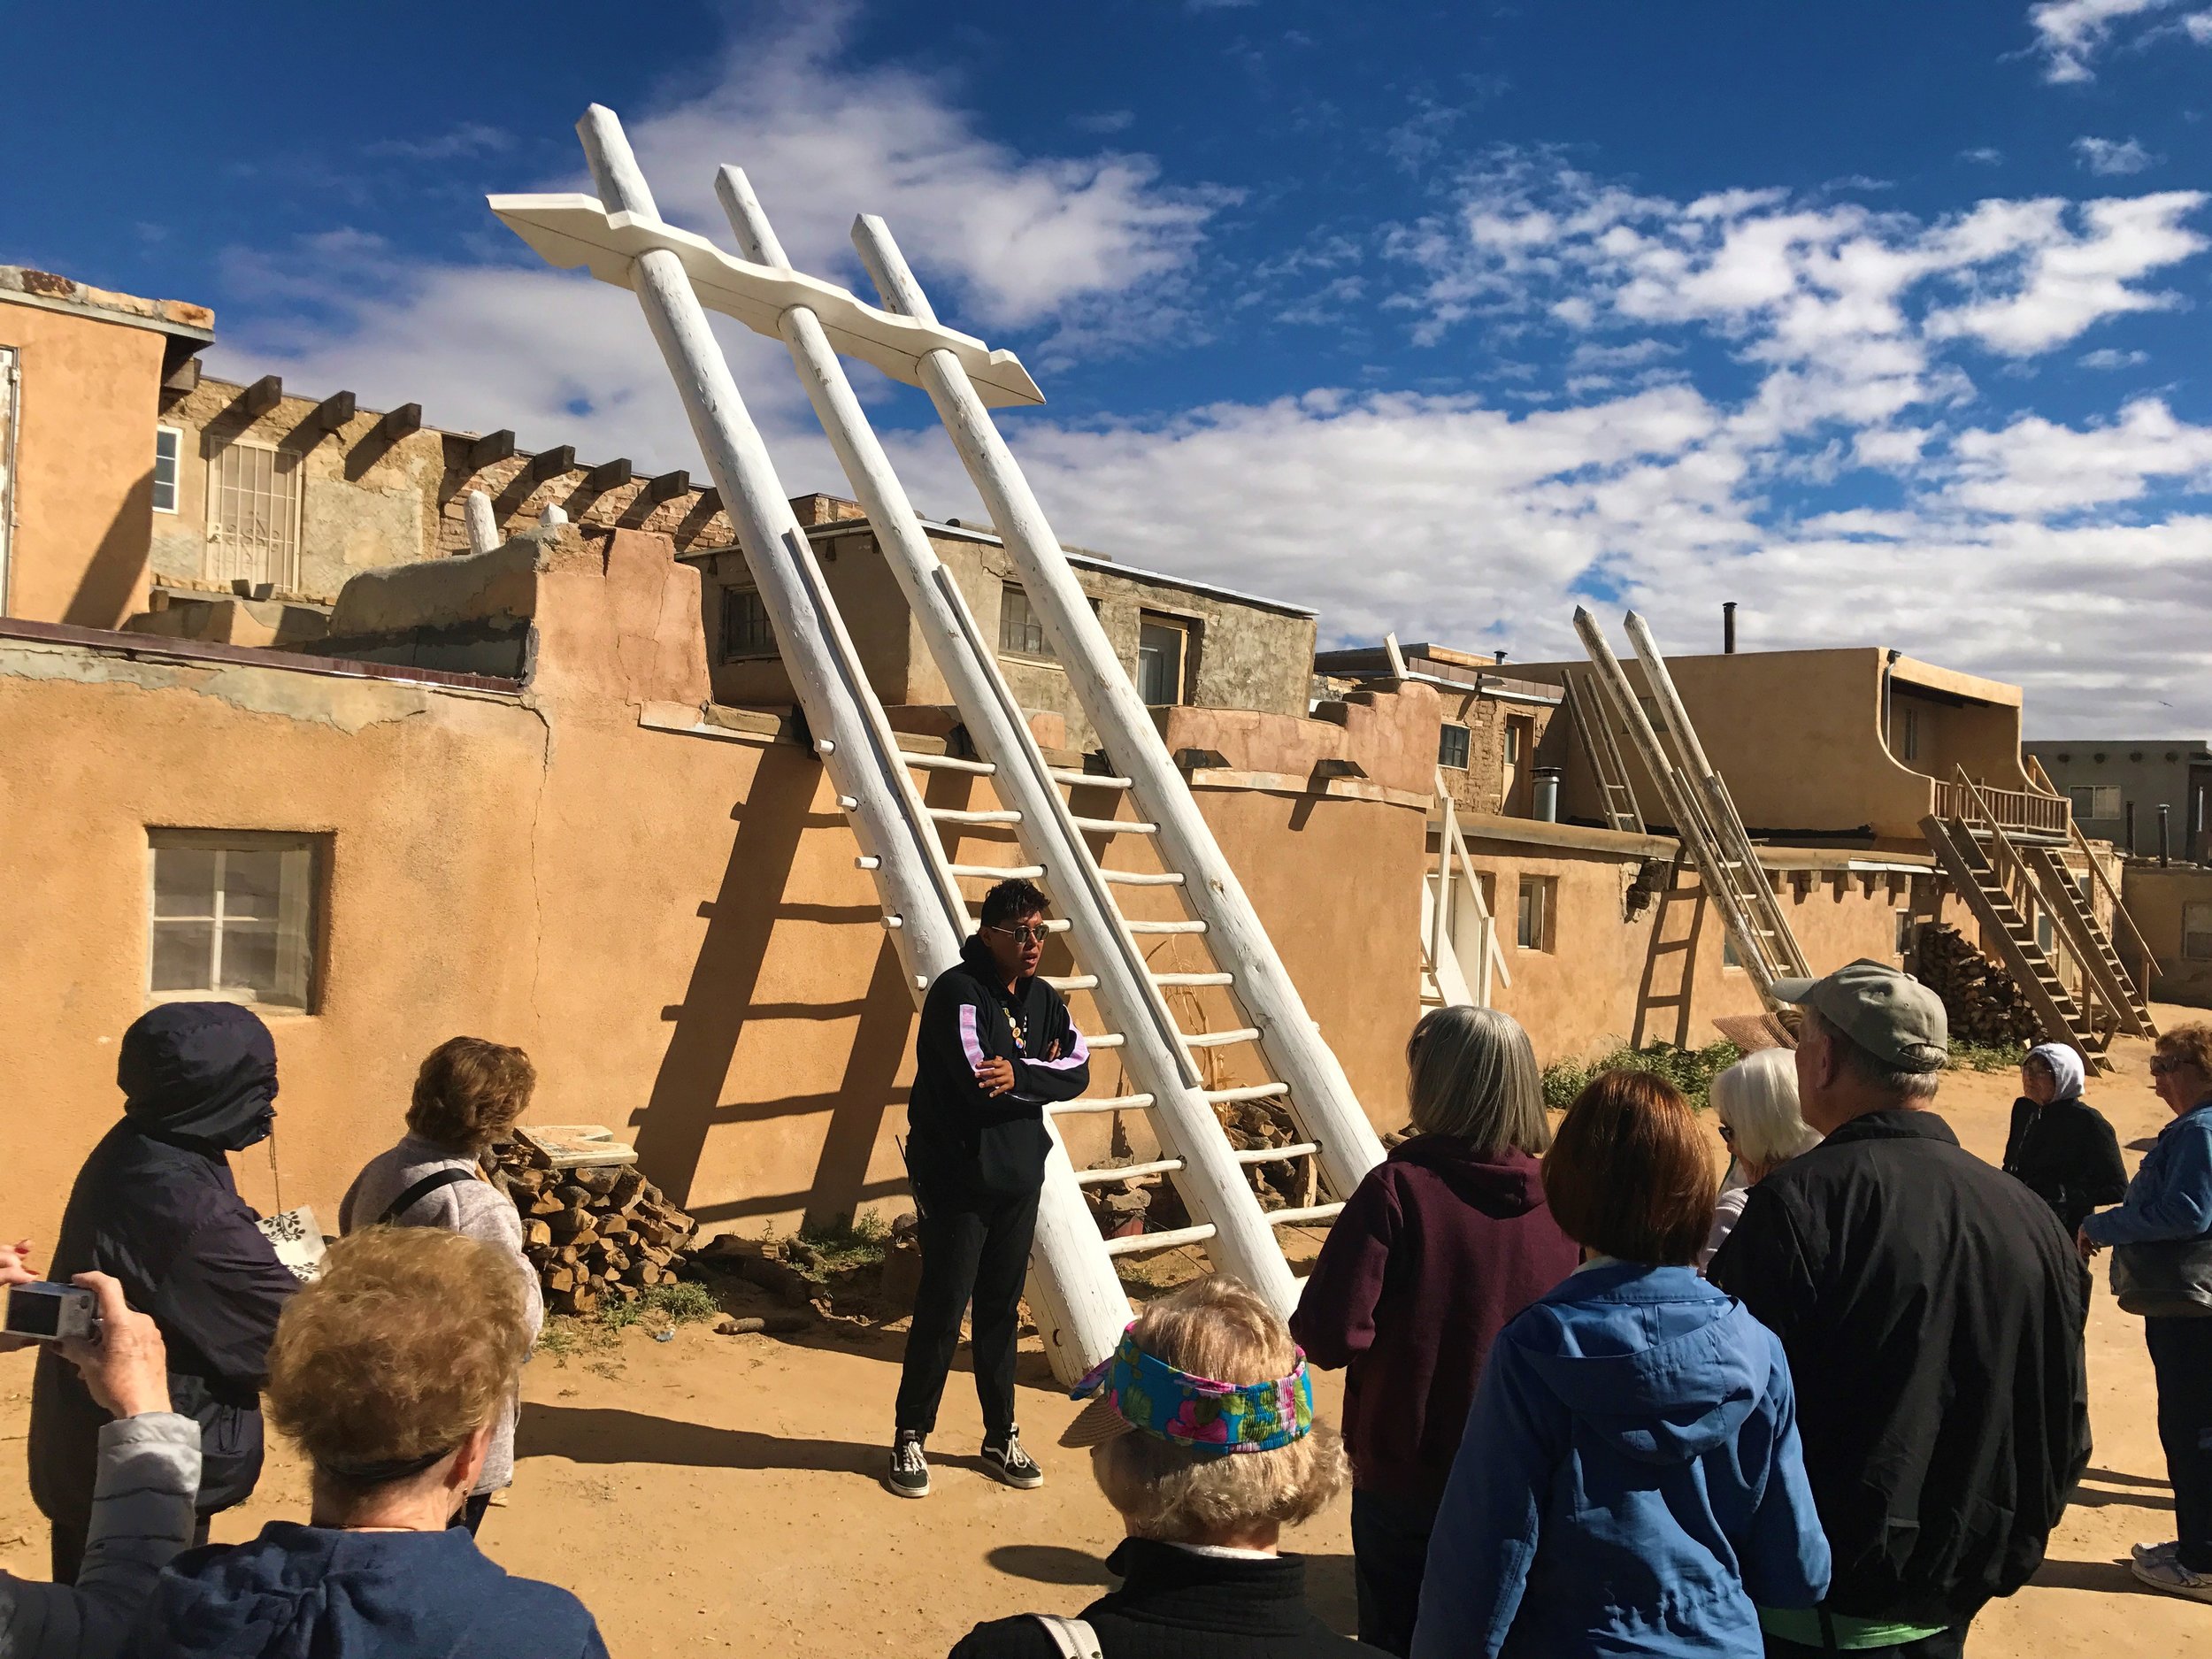 Our local guide showing us around the Acoma Pueblo